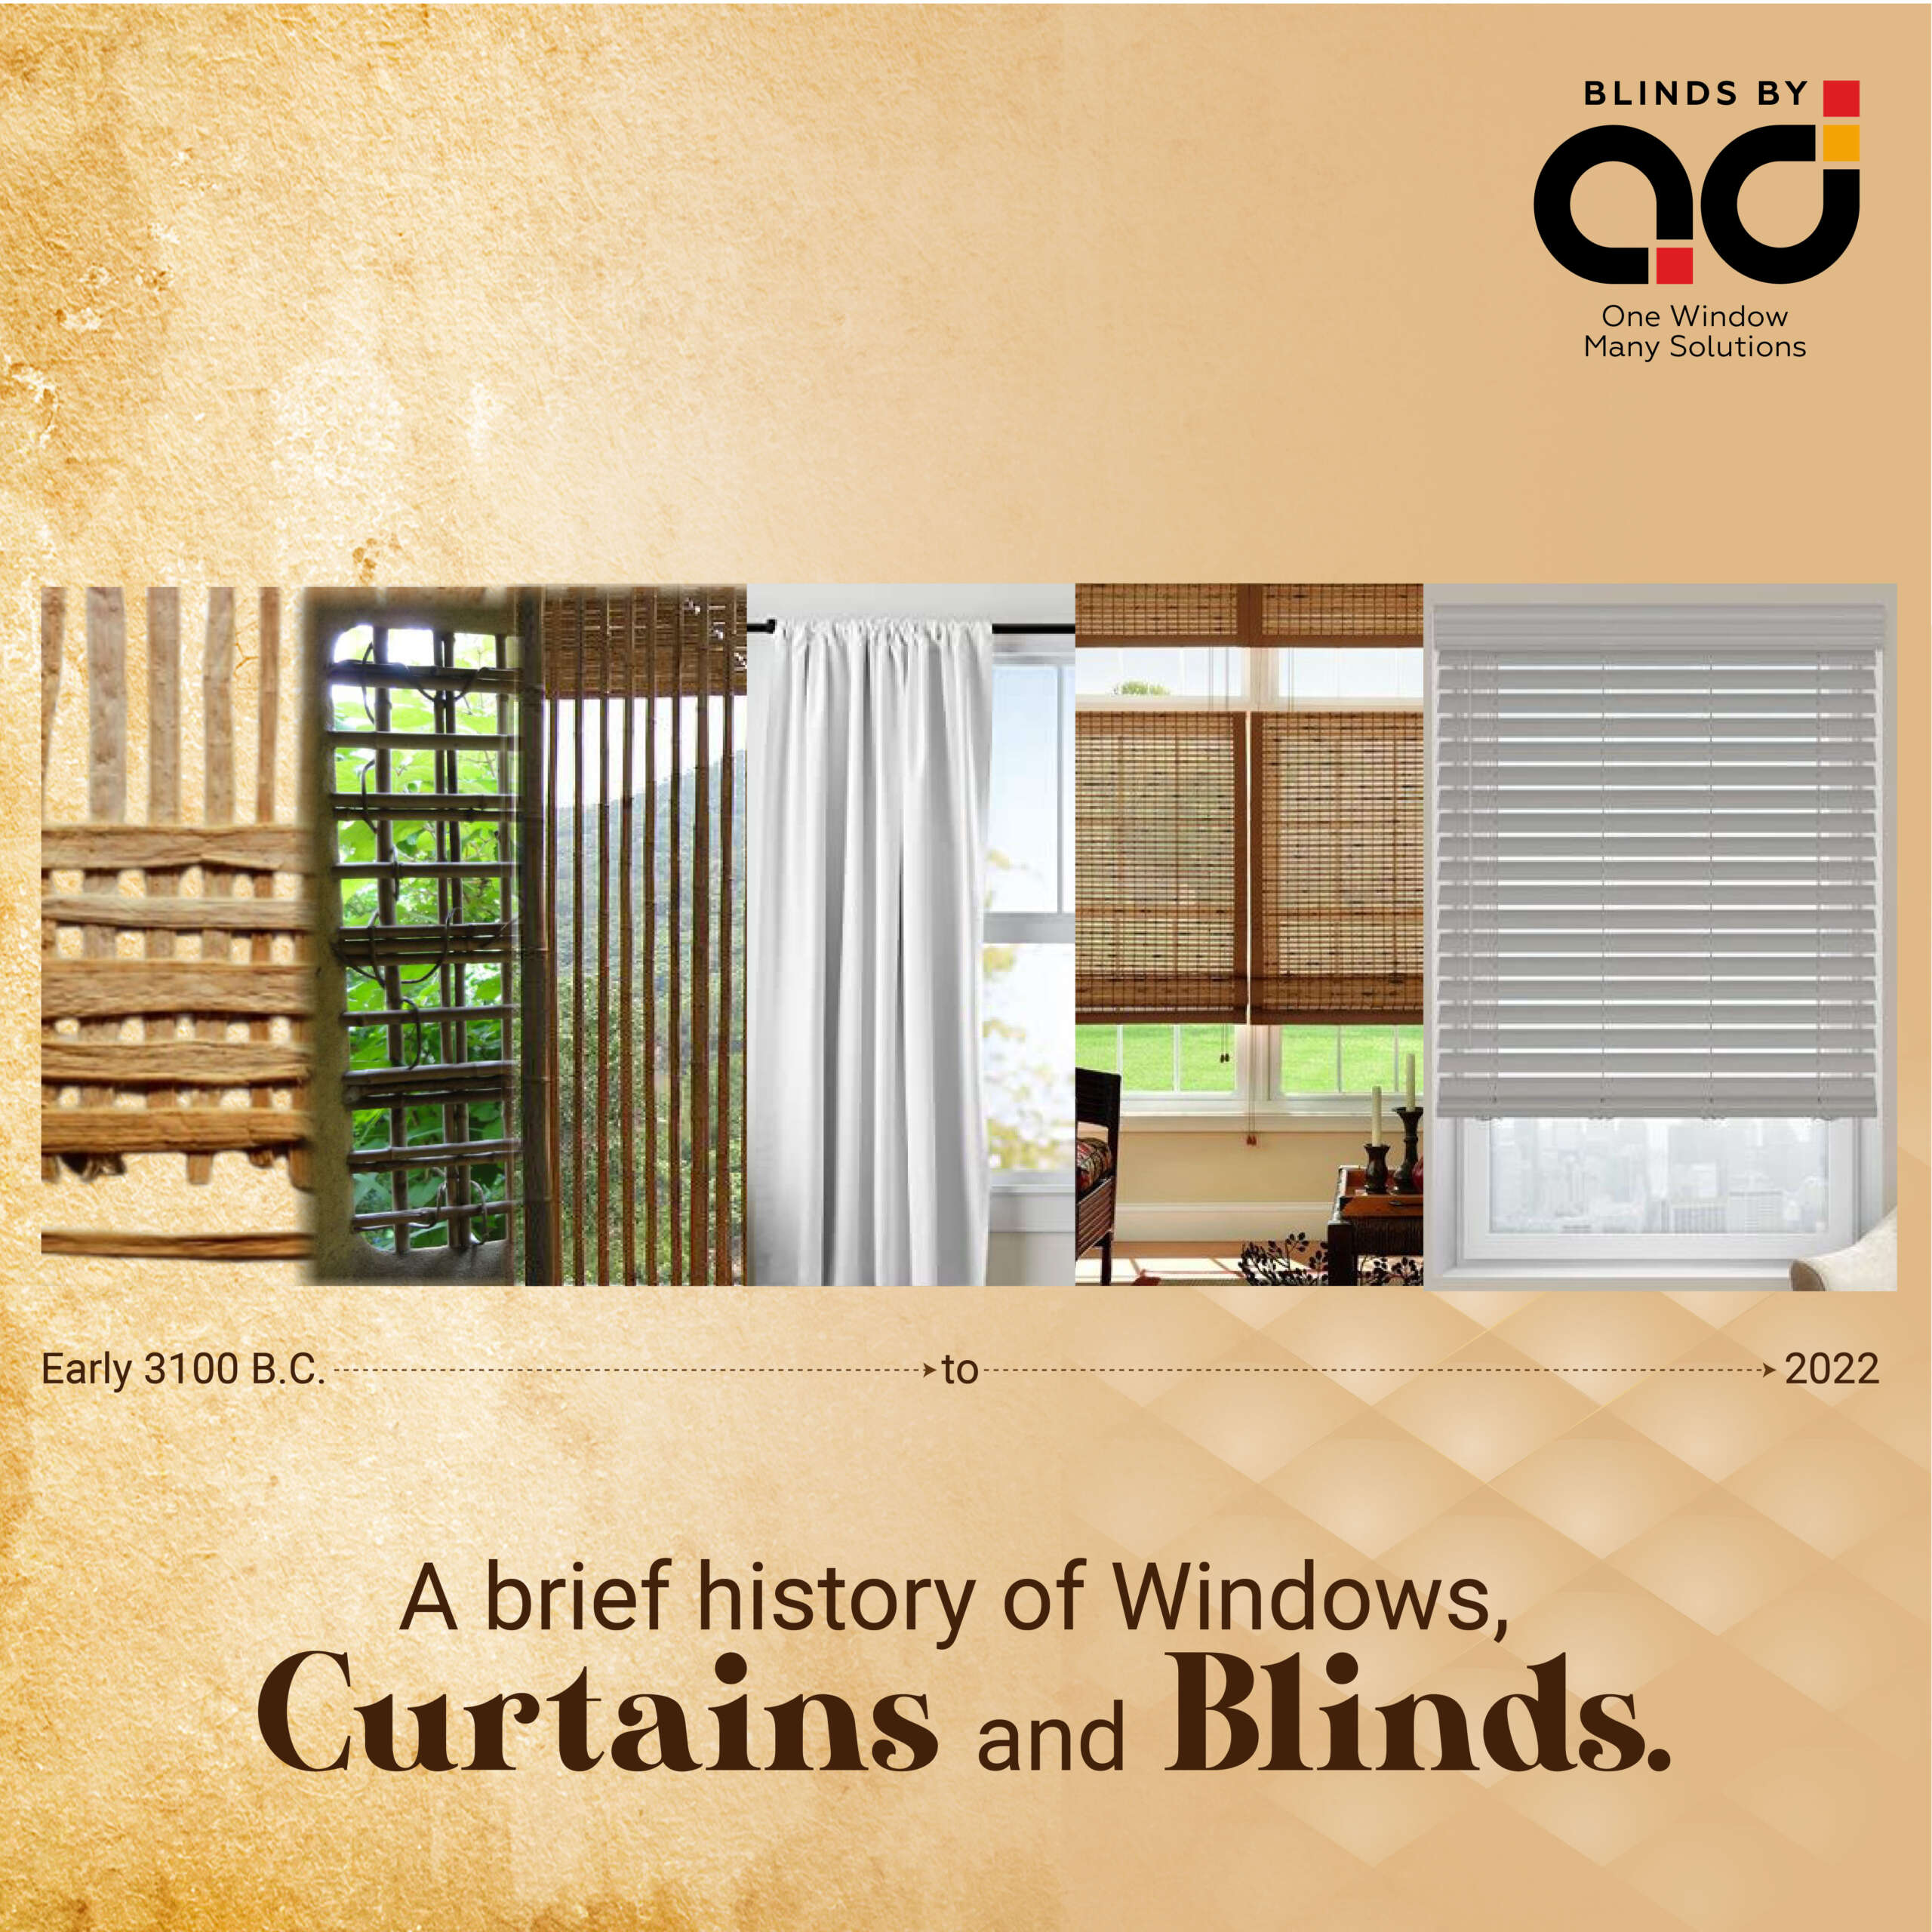 A brief history of Windows, Curtains and Blinds.